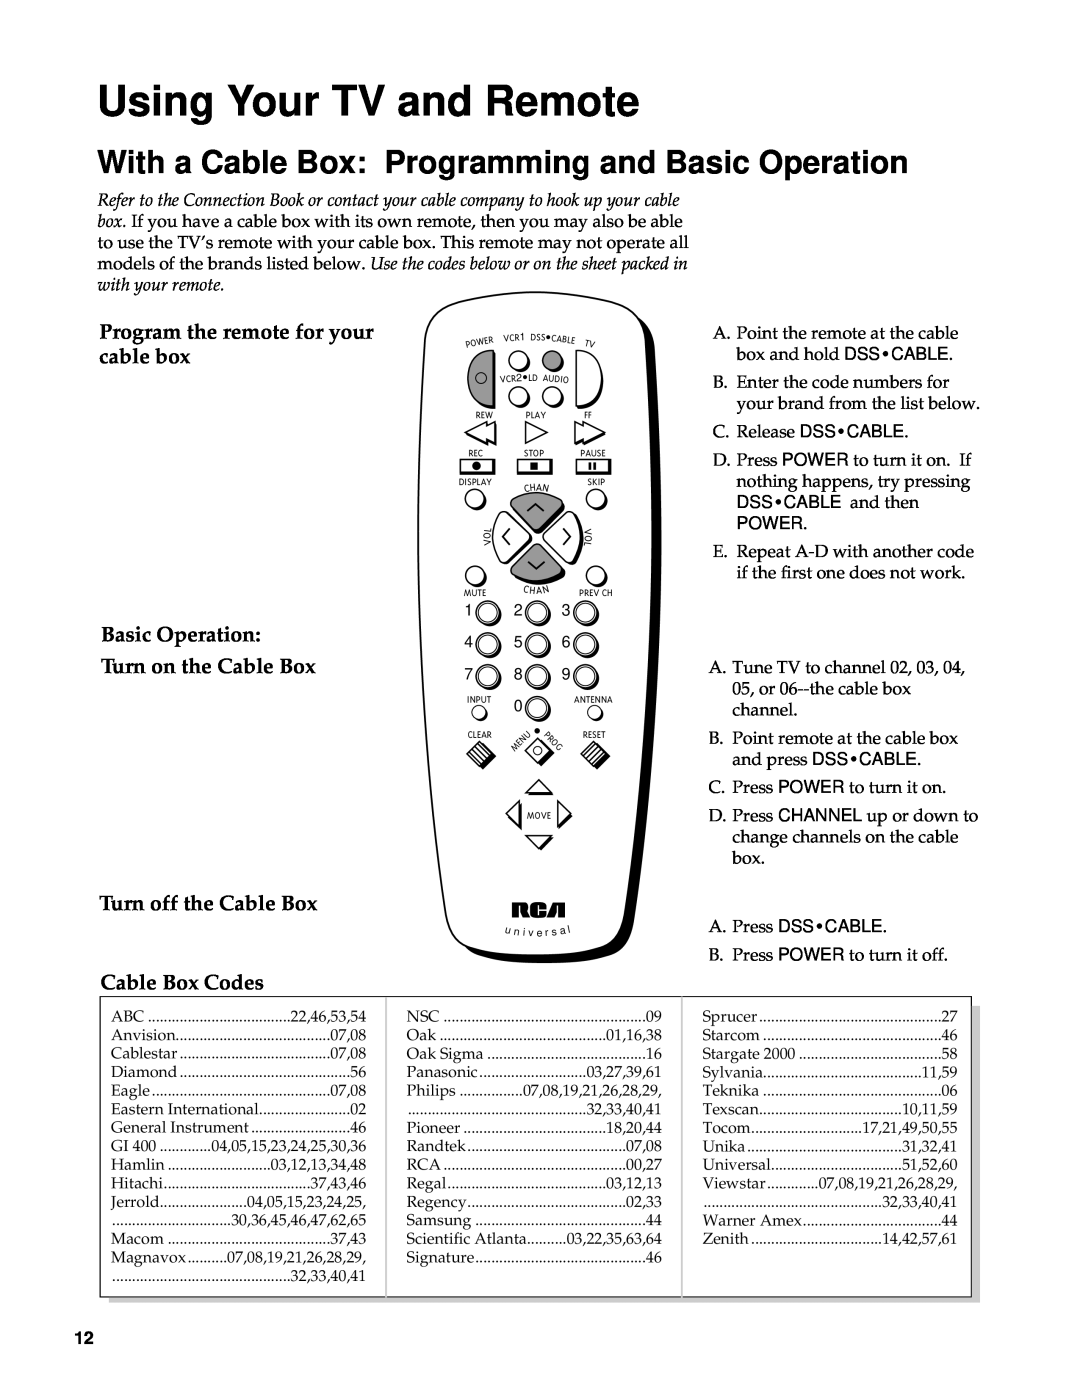 RCA Color TV With a Cable Box Programming and Basic Operation, Program the remote for your cable box, Cable Box Codes 